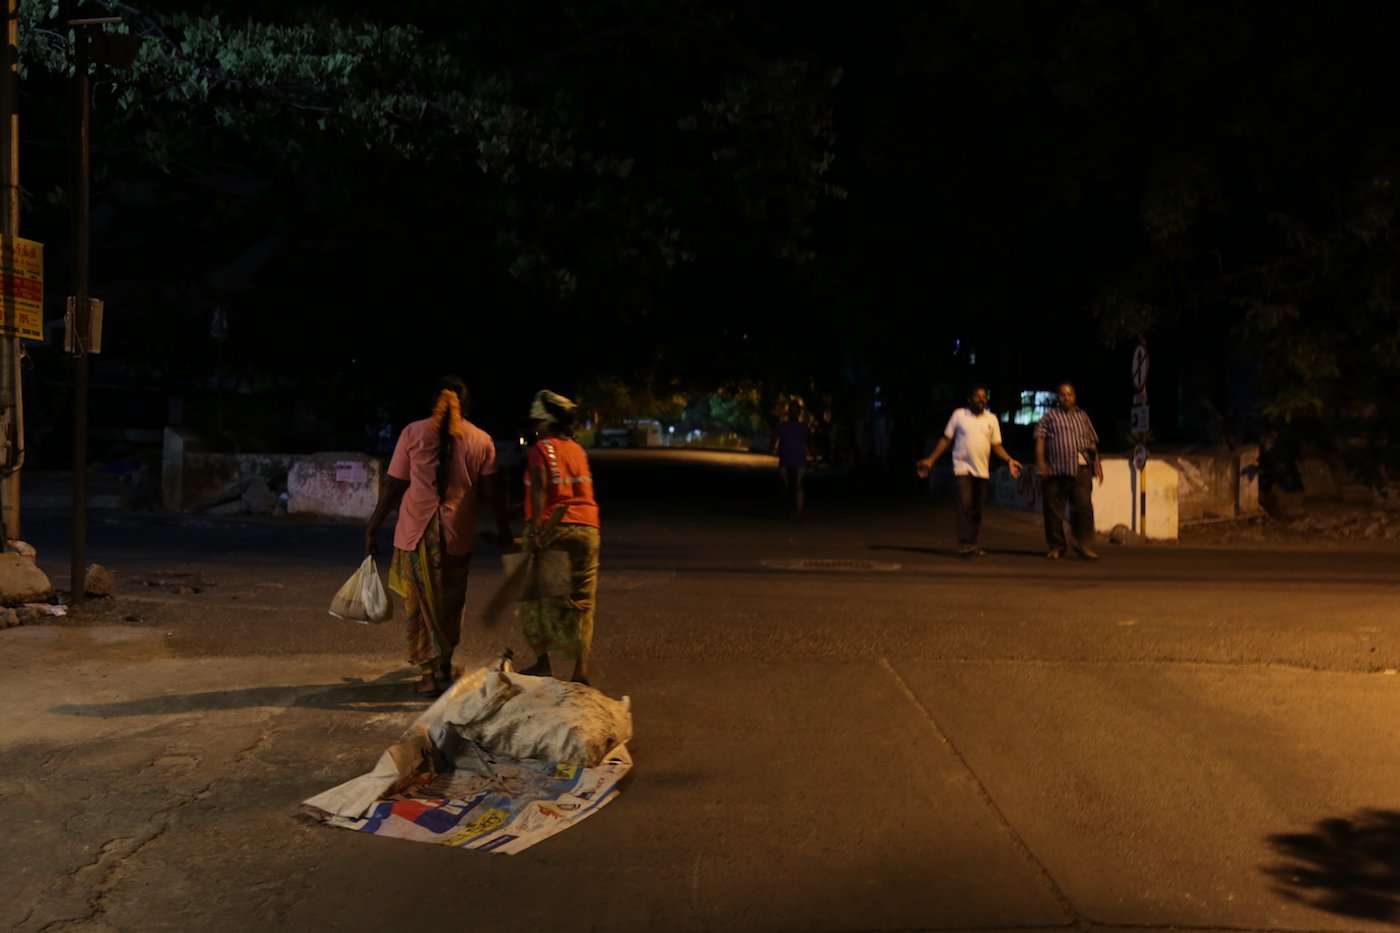 With just a few passers-by on the road at this late hour, they continue to quietly work to keep White Town clean